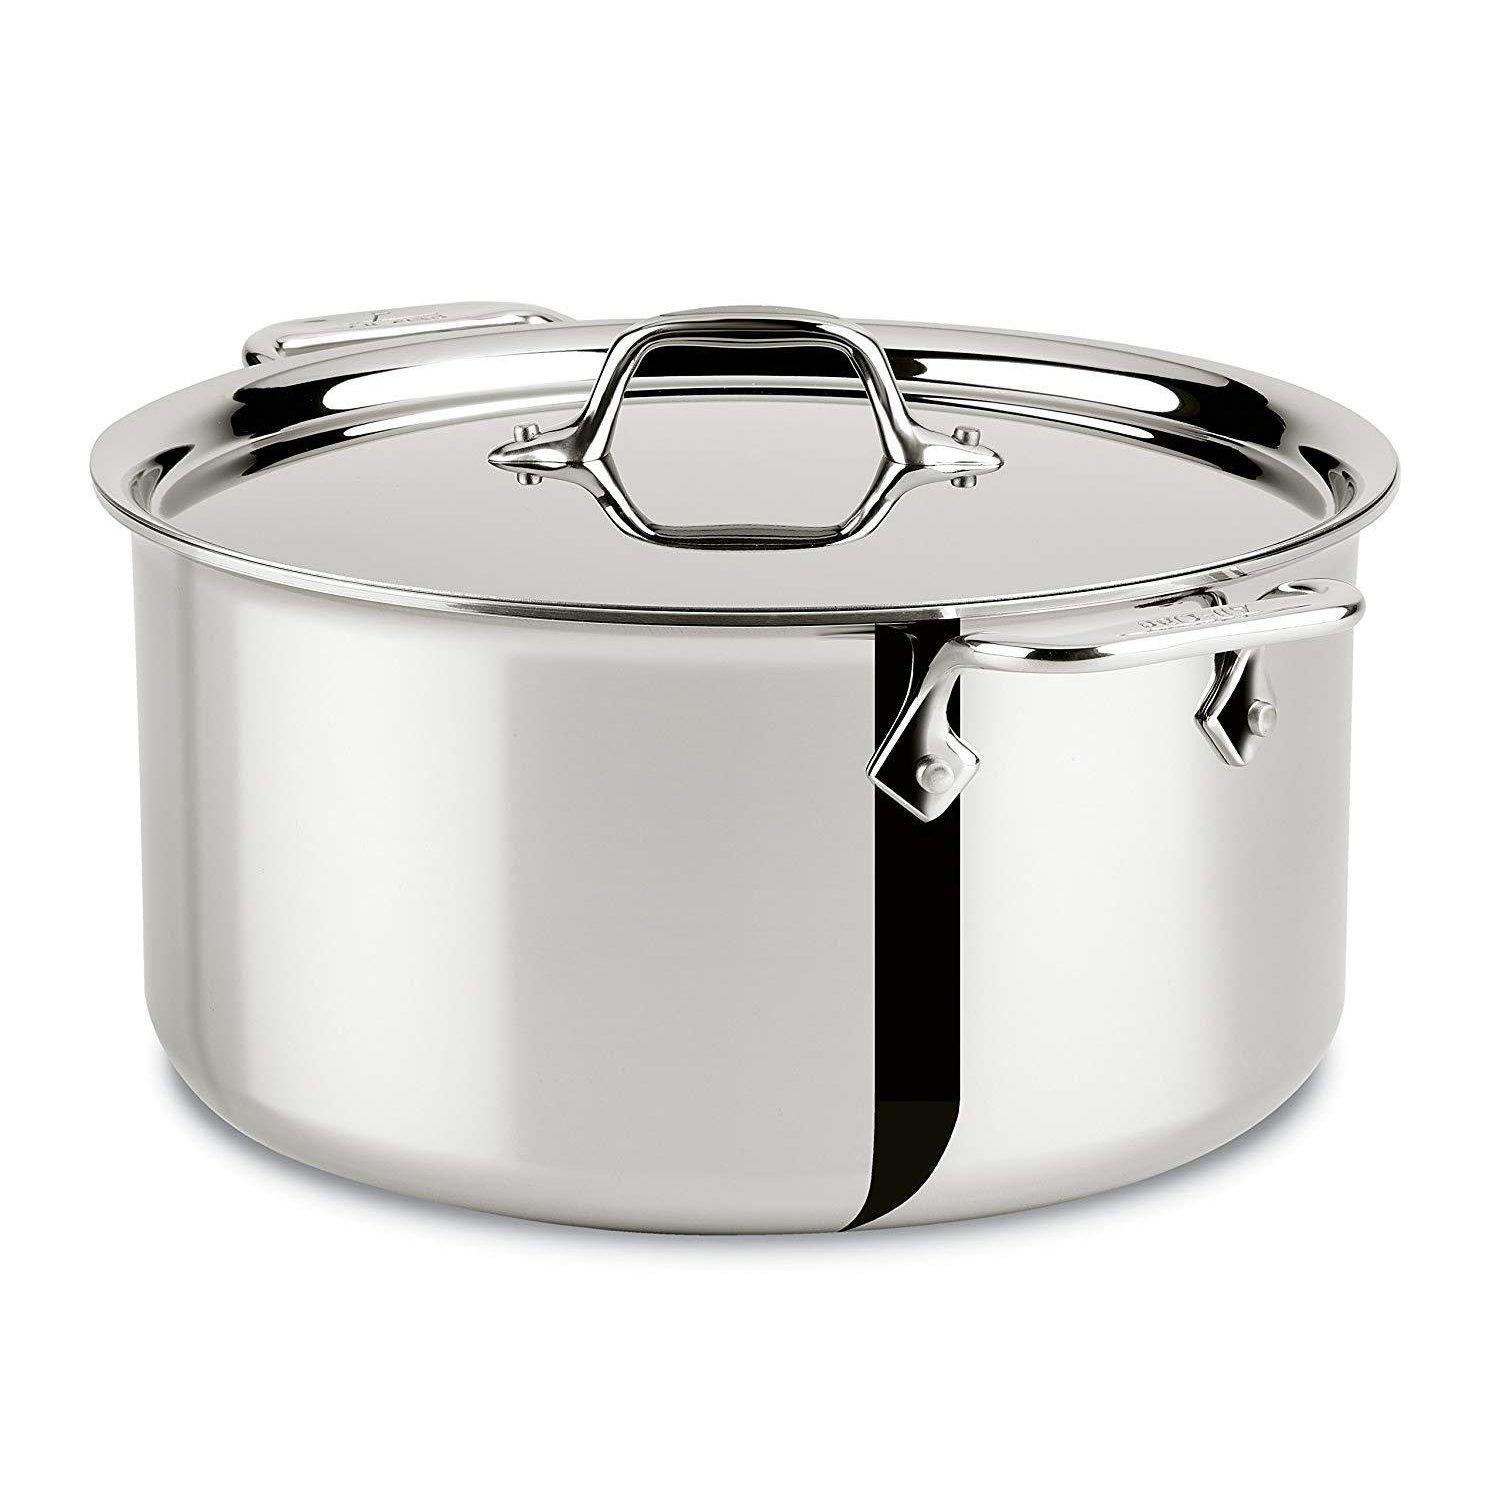 All-Clad D5 - 8 qt. Stainless Steel Polished Stock Pot w/ Lid